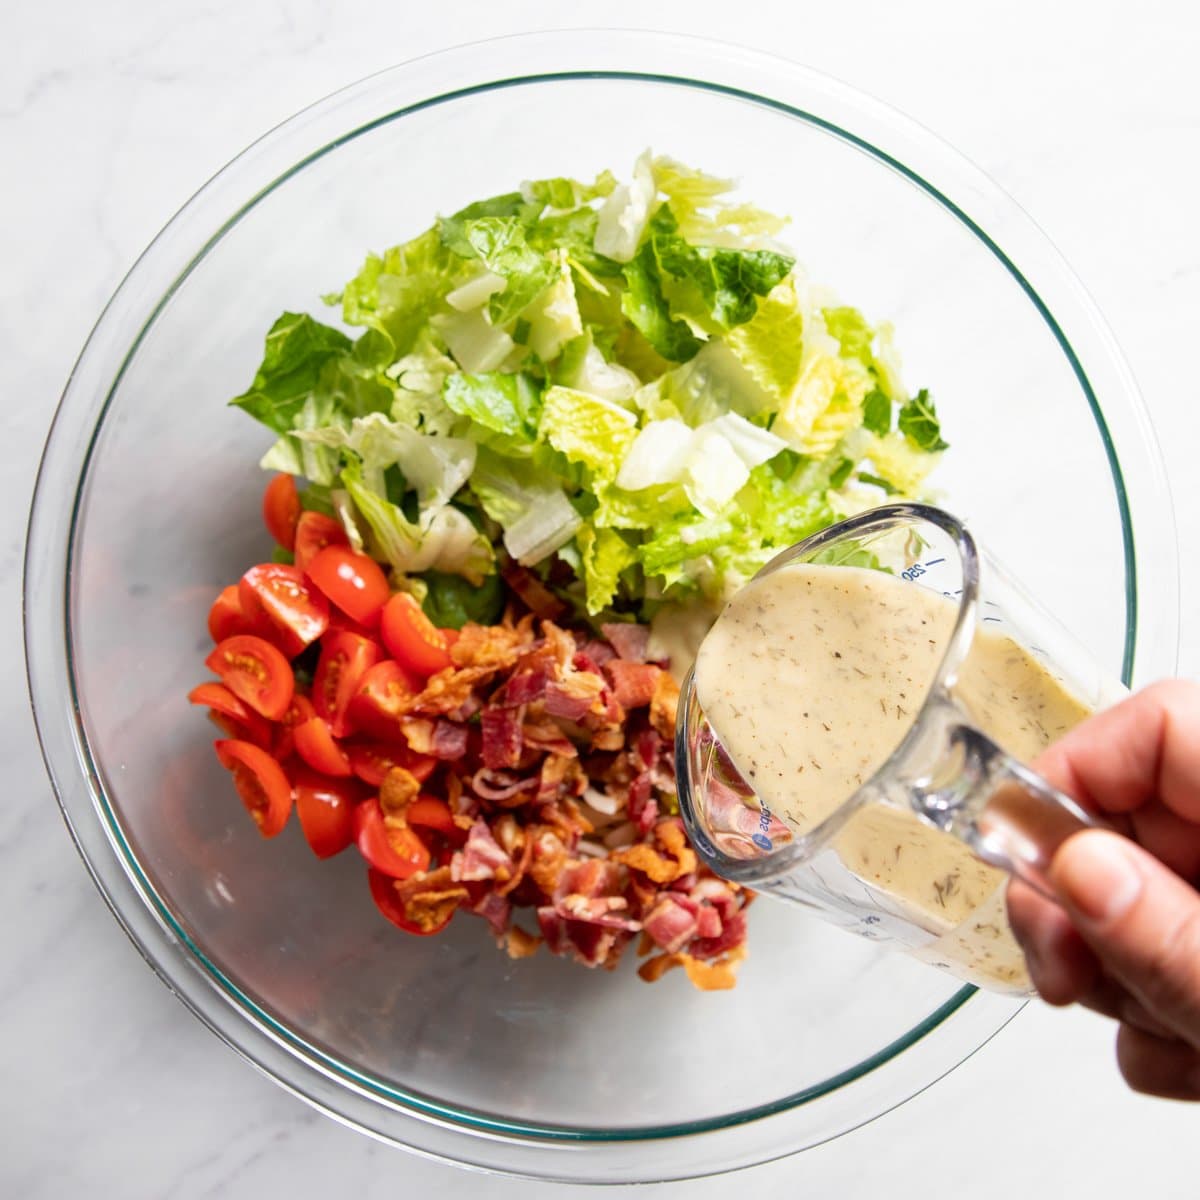 Pouring Fody's Herb Dressing into a mixing bowl filled with lettuce, cooked pasta, tomatoes, and crumbled bacon.